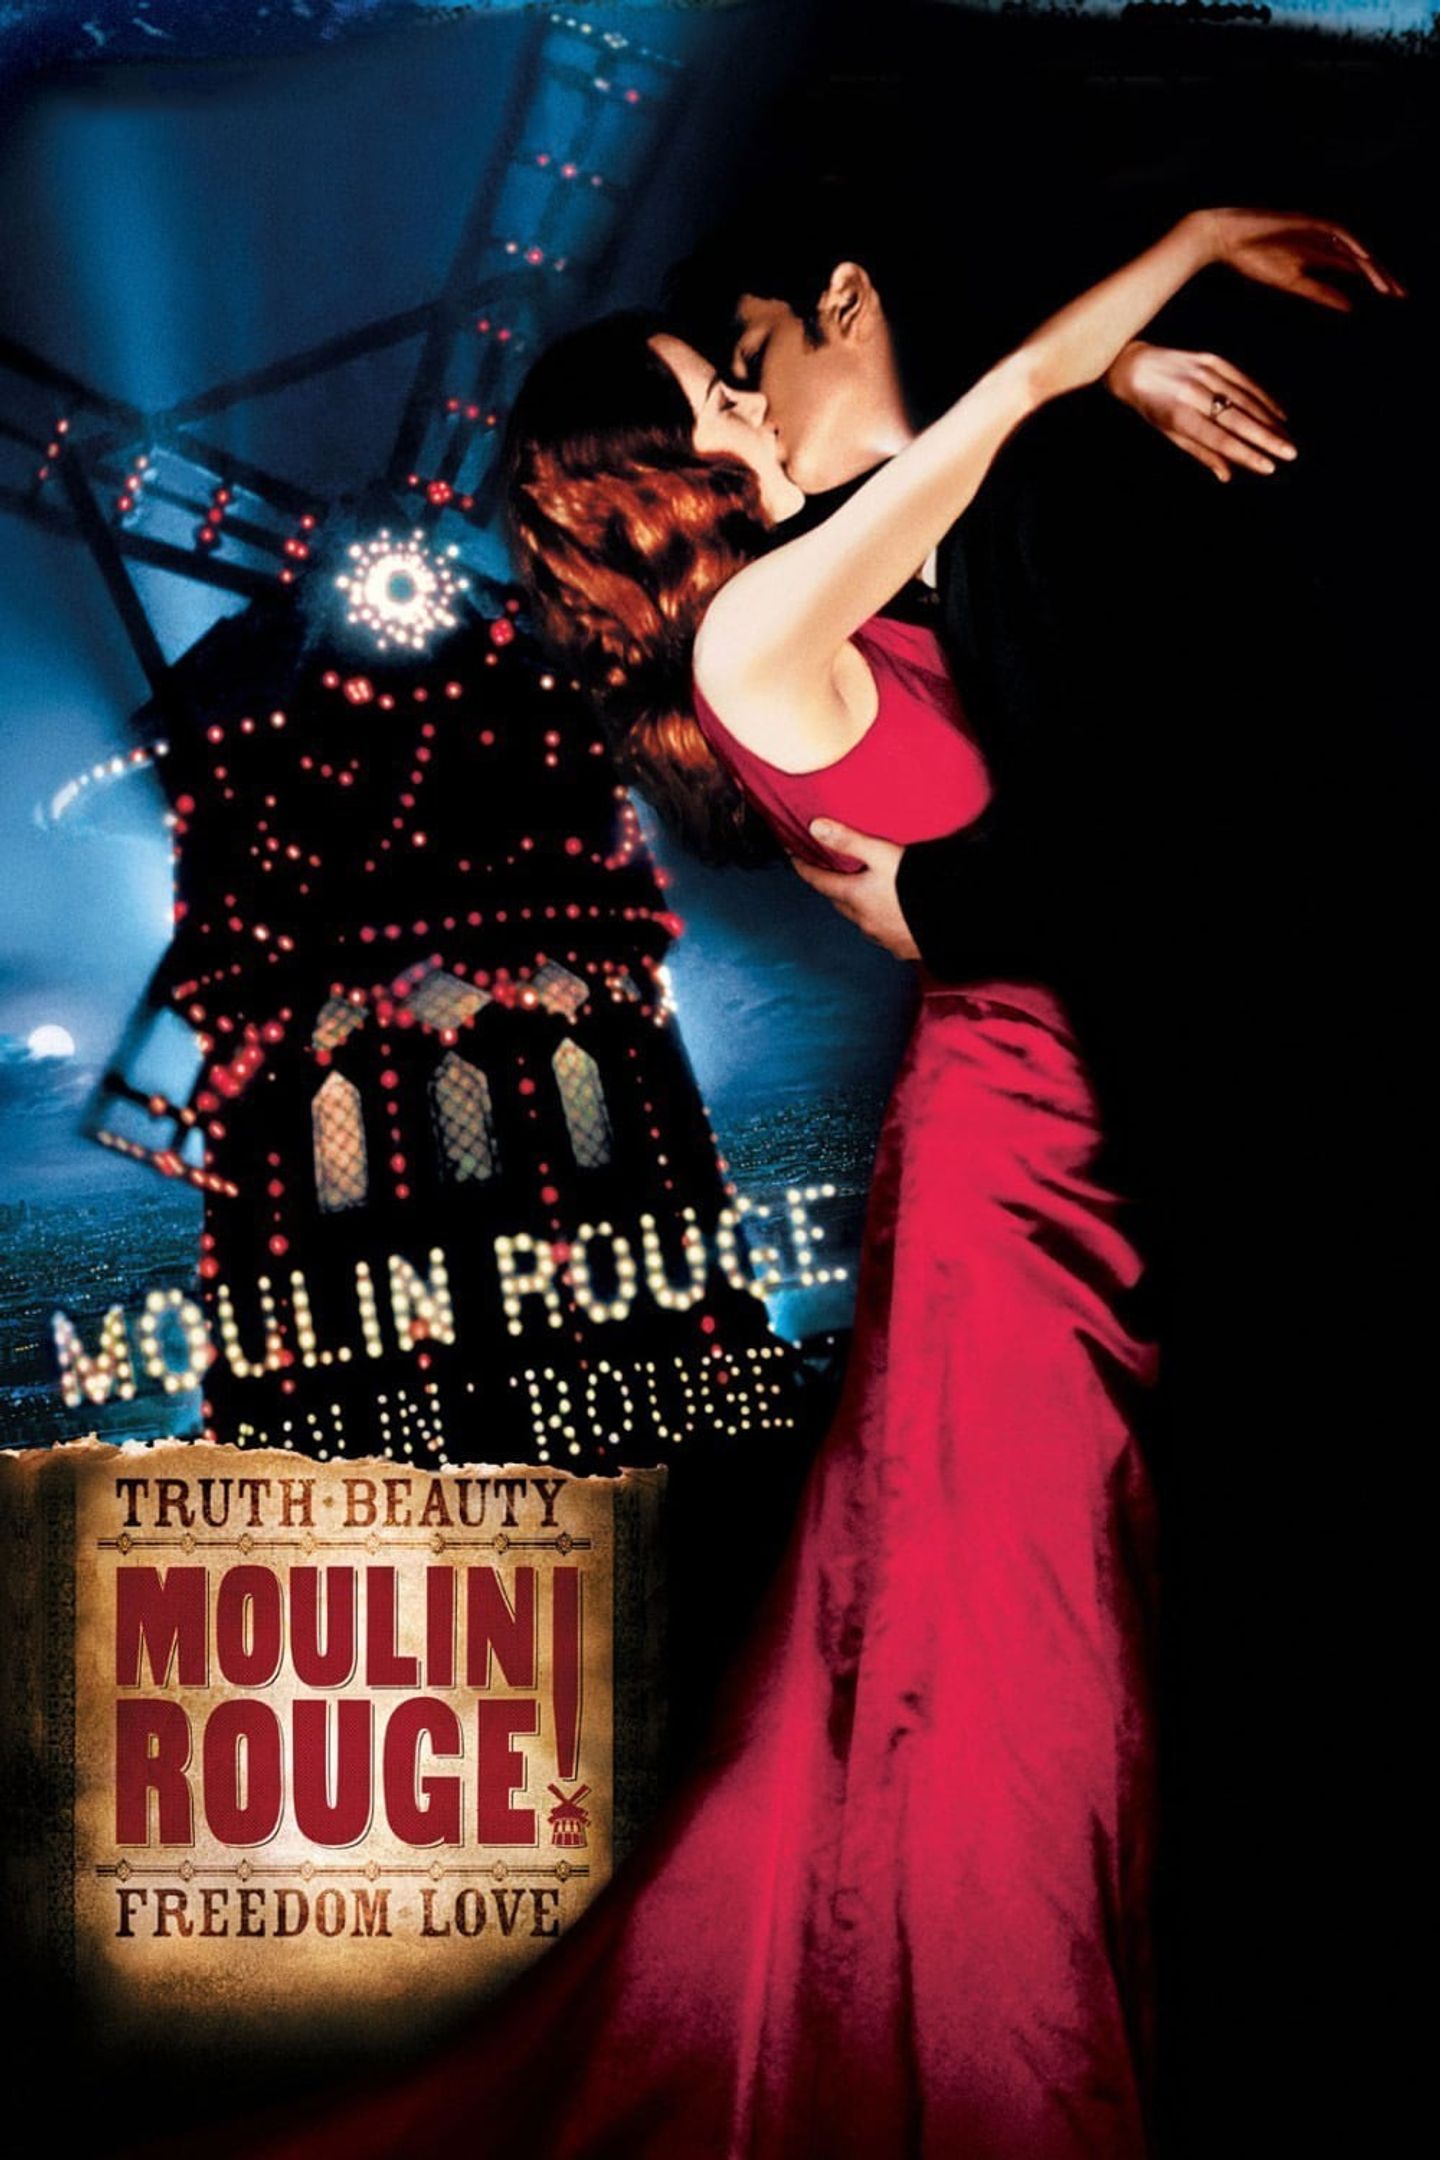 Plakat for 'Moulin Rouge!'